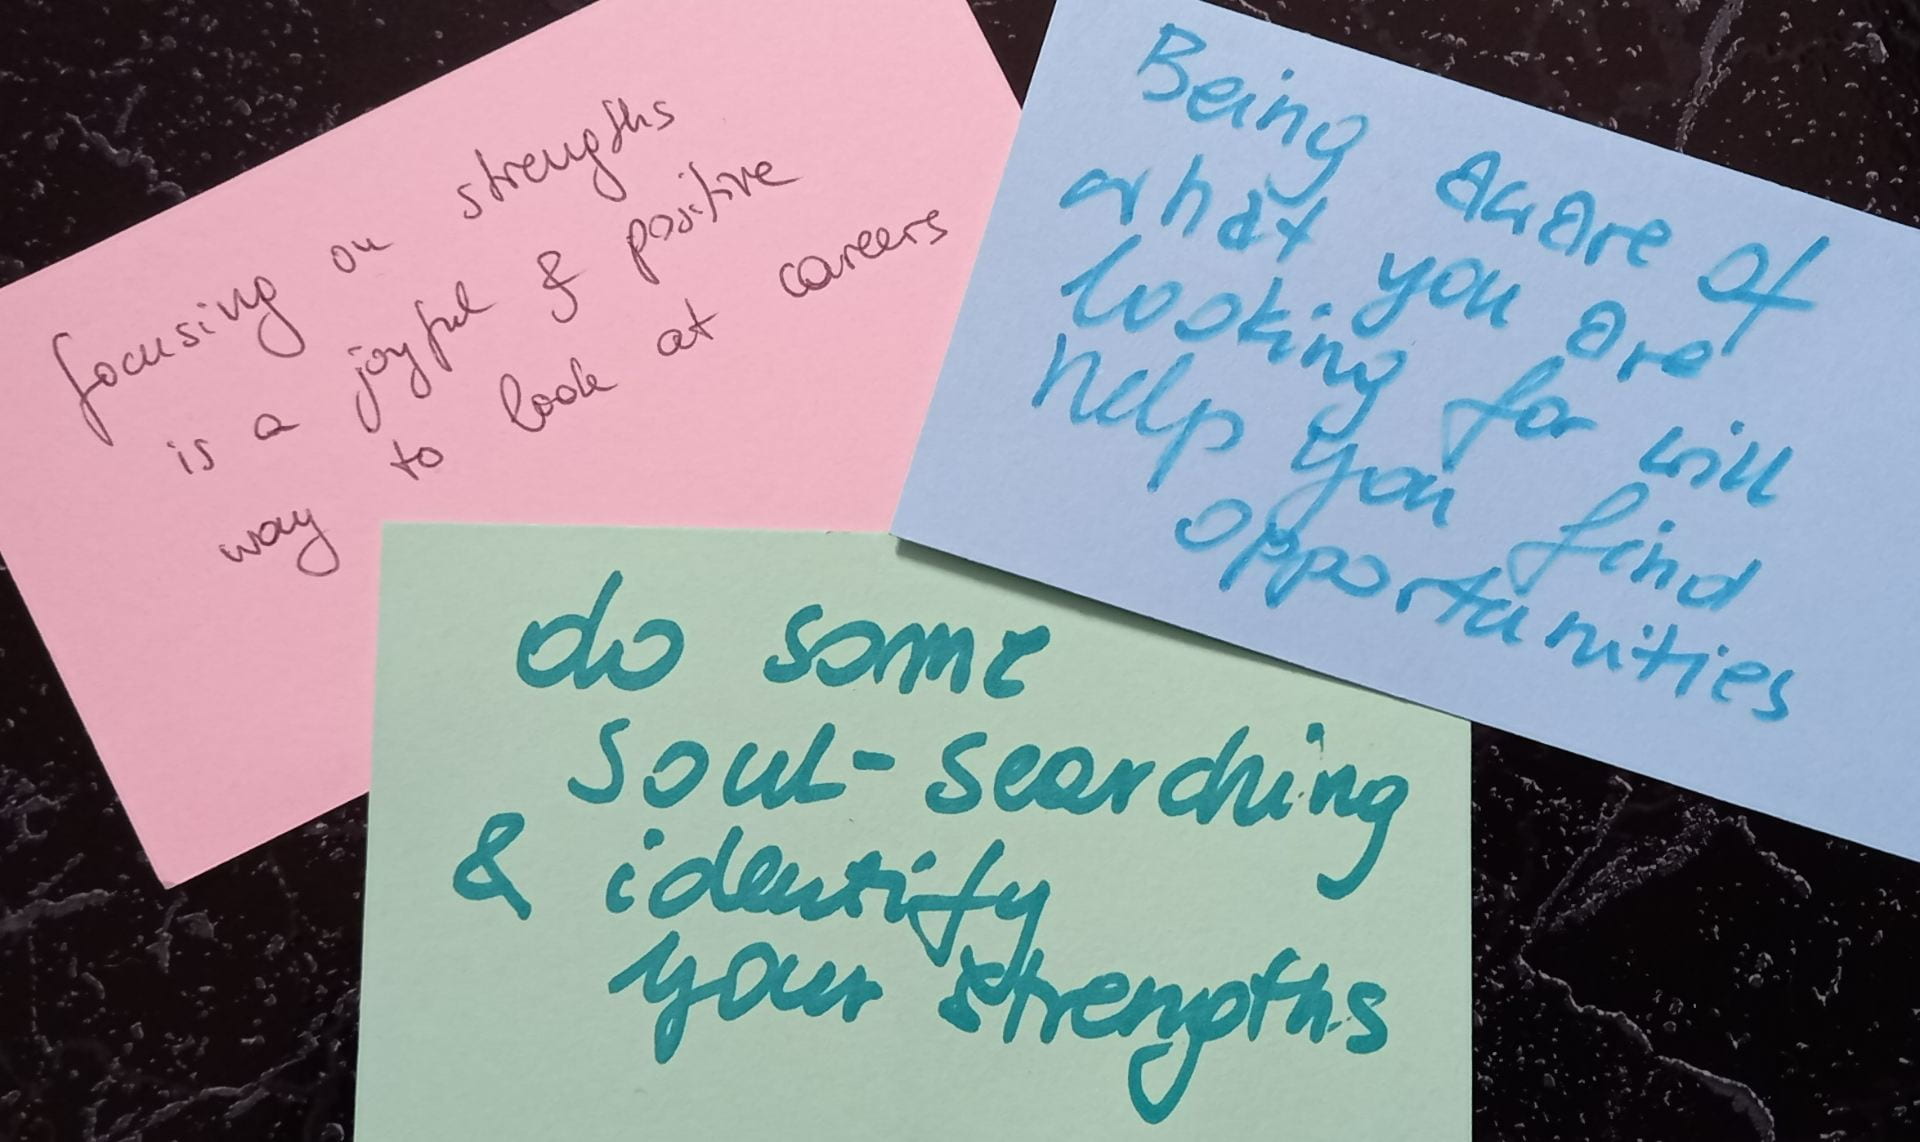 Take-home messages from the Careers Beyond Research event: focusing on strengths is a joyful and positive way to look at careers, do some soul-searching and identify your strengths, being aware of what you are looking for will help you find opportunities.